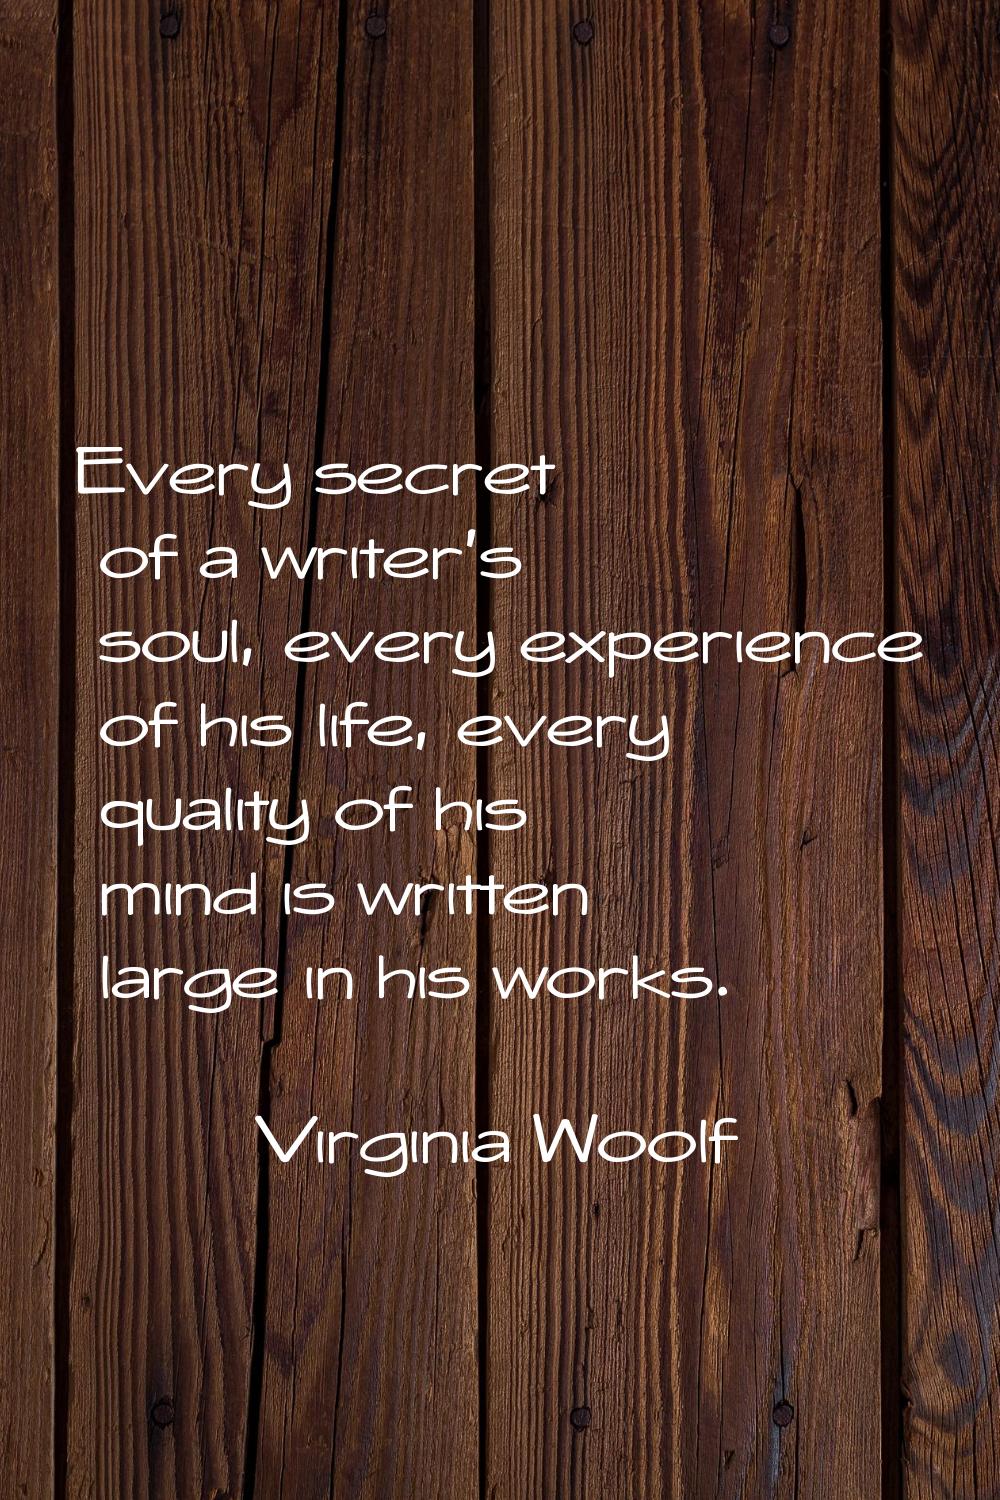 Every secret of a writer's soul, every experience of his life, every quality of his mind is written